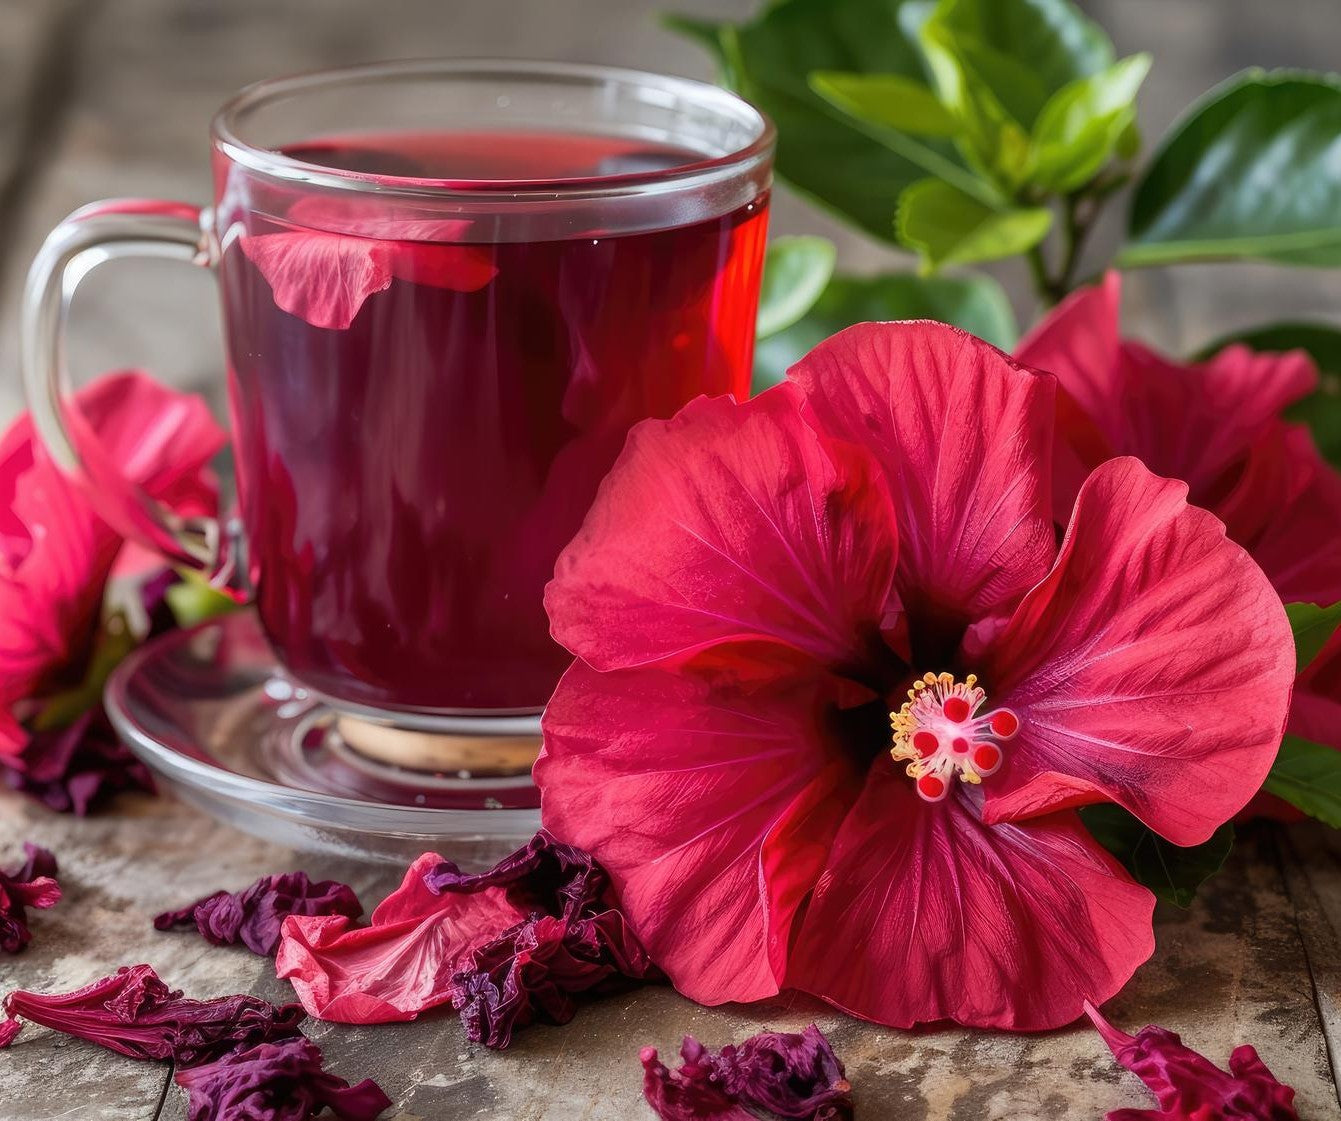 Is Hibiscus tea good for you?